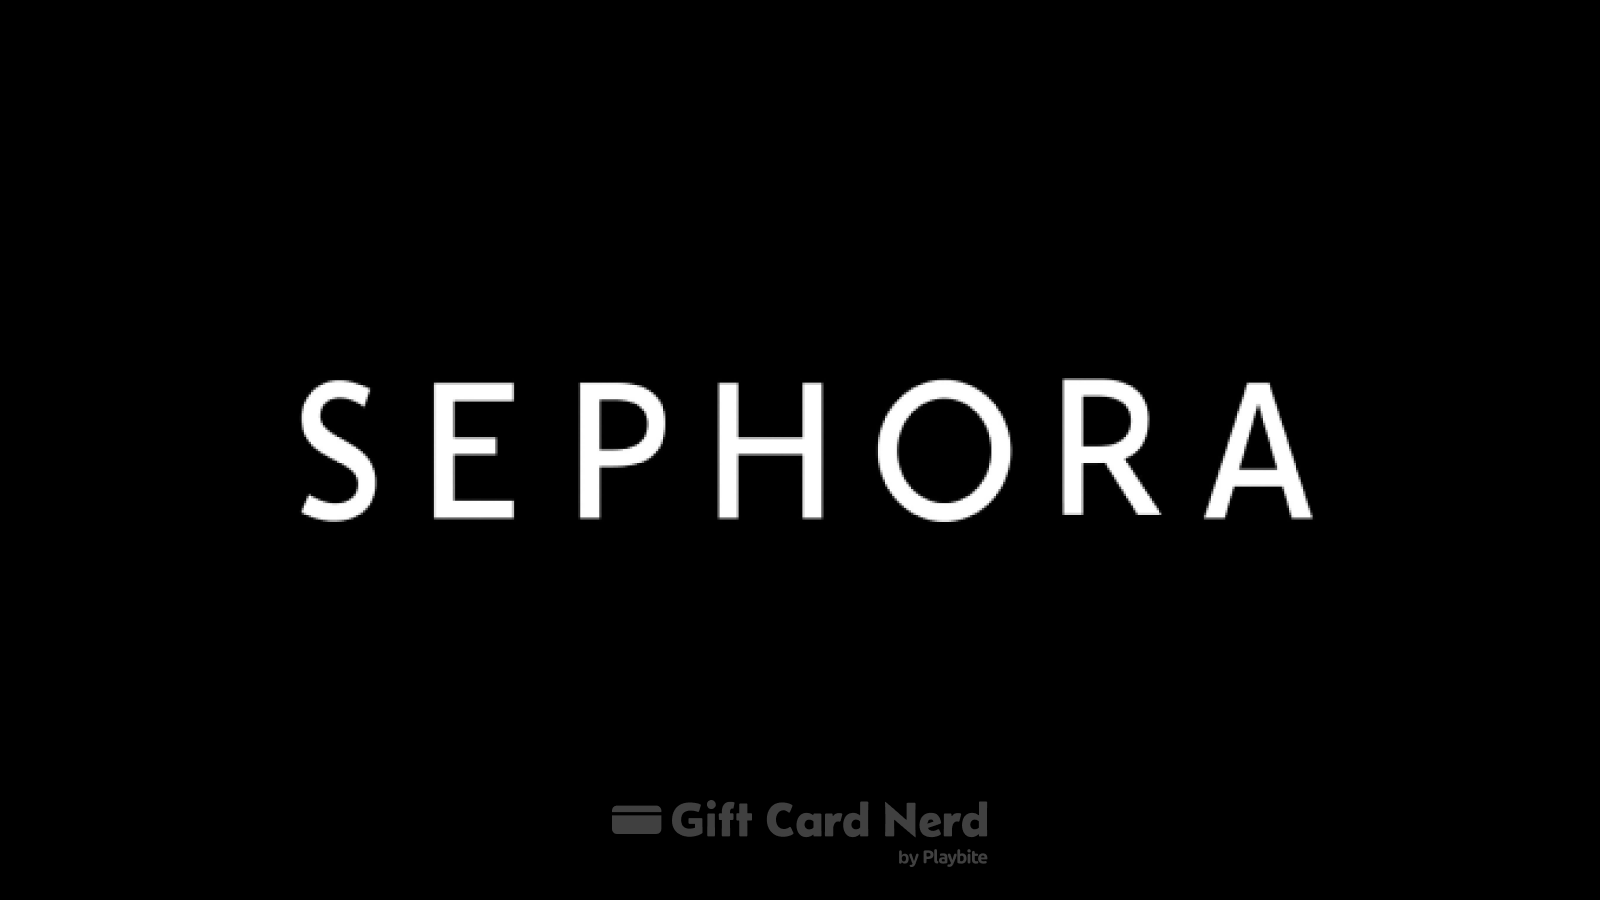 Can I Use a Sephora Gift Card on Steam?